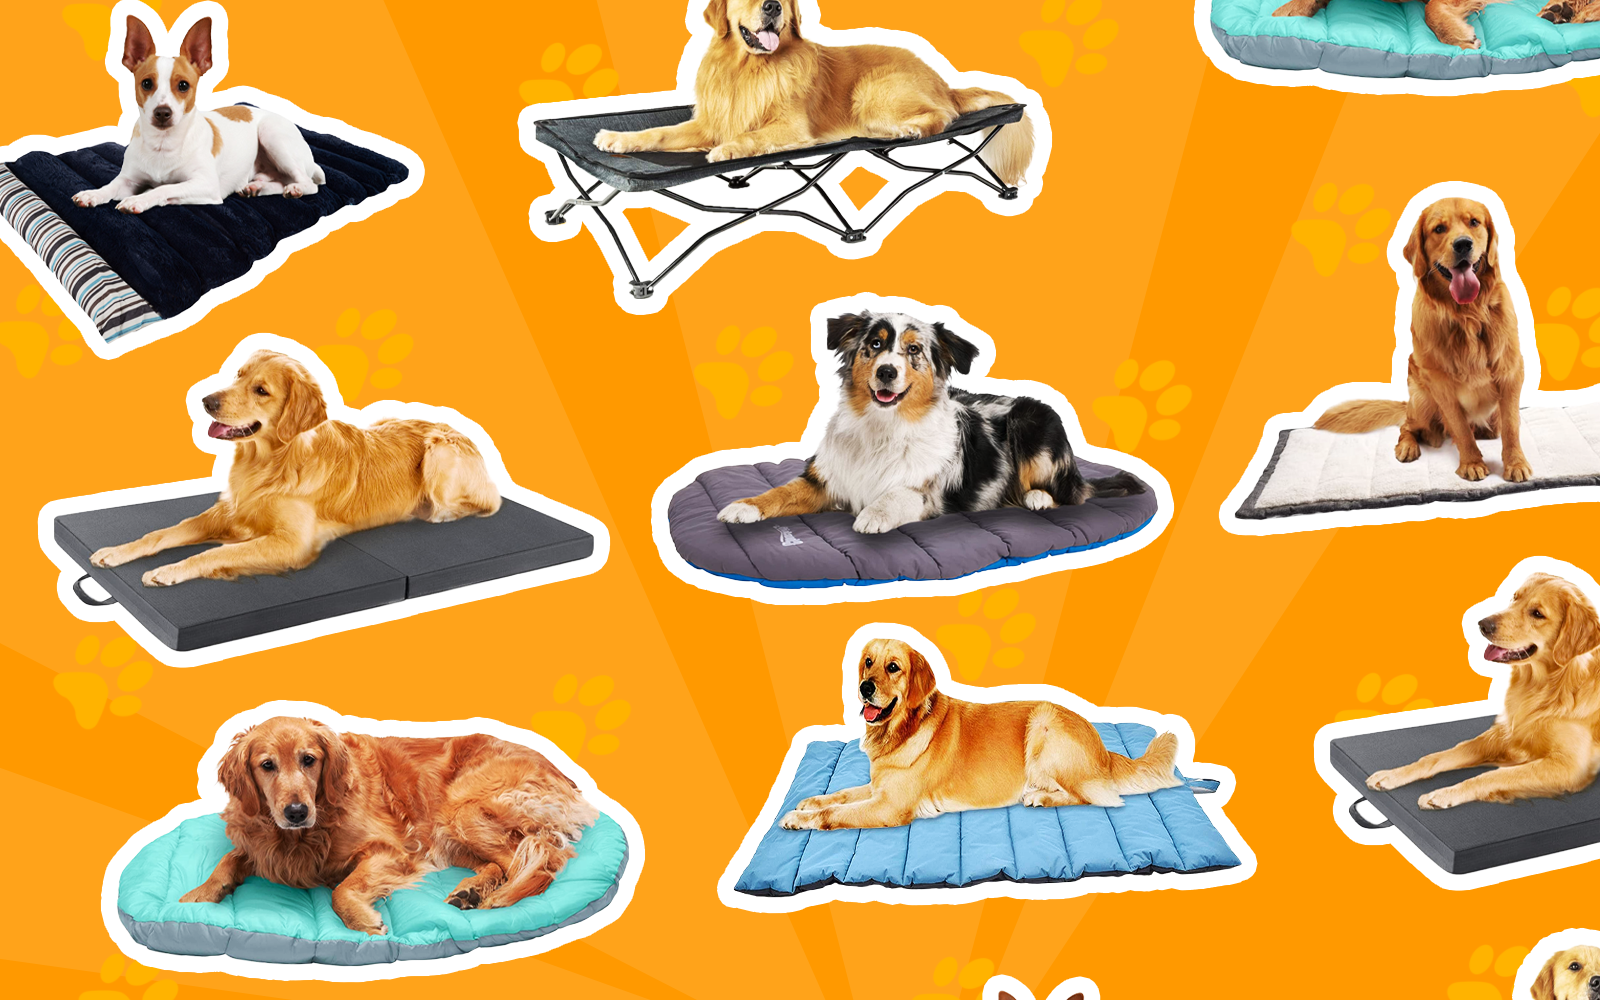 7 Best Travel Dog Beds in 2022 | Top Picks